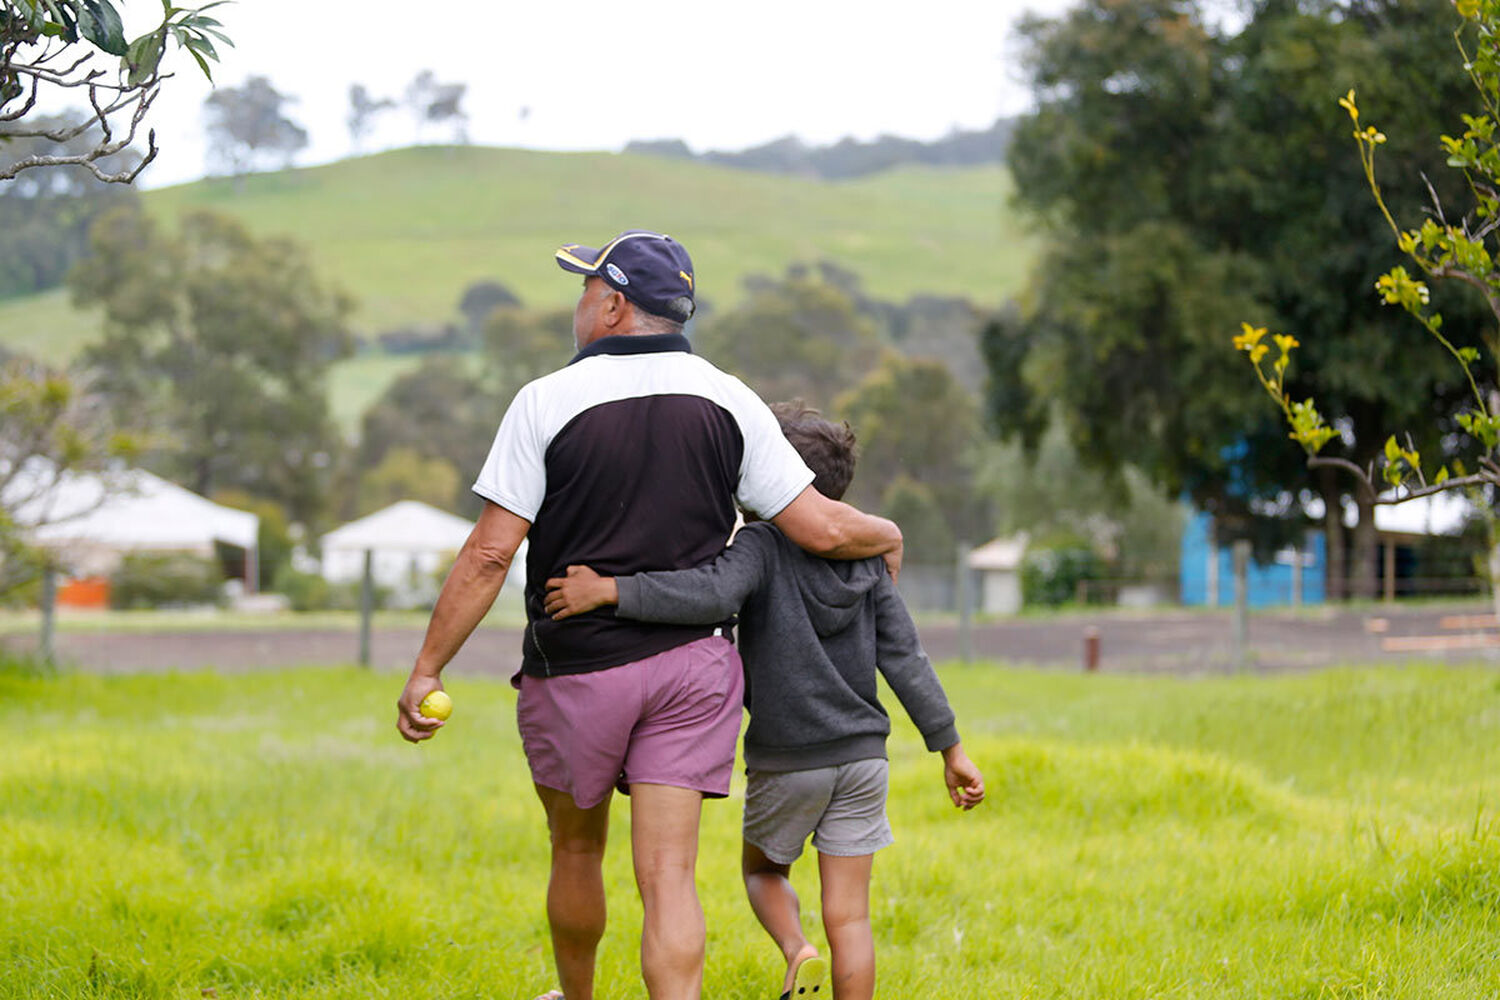 Foster Carer Francis Khan Walking With Arm Around Young Boy Outdoors At Roelands Village